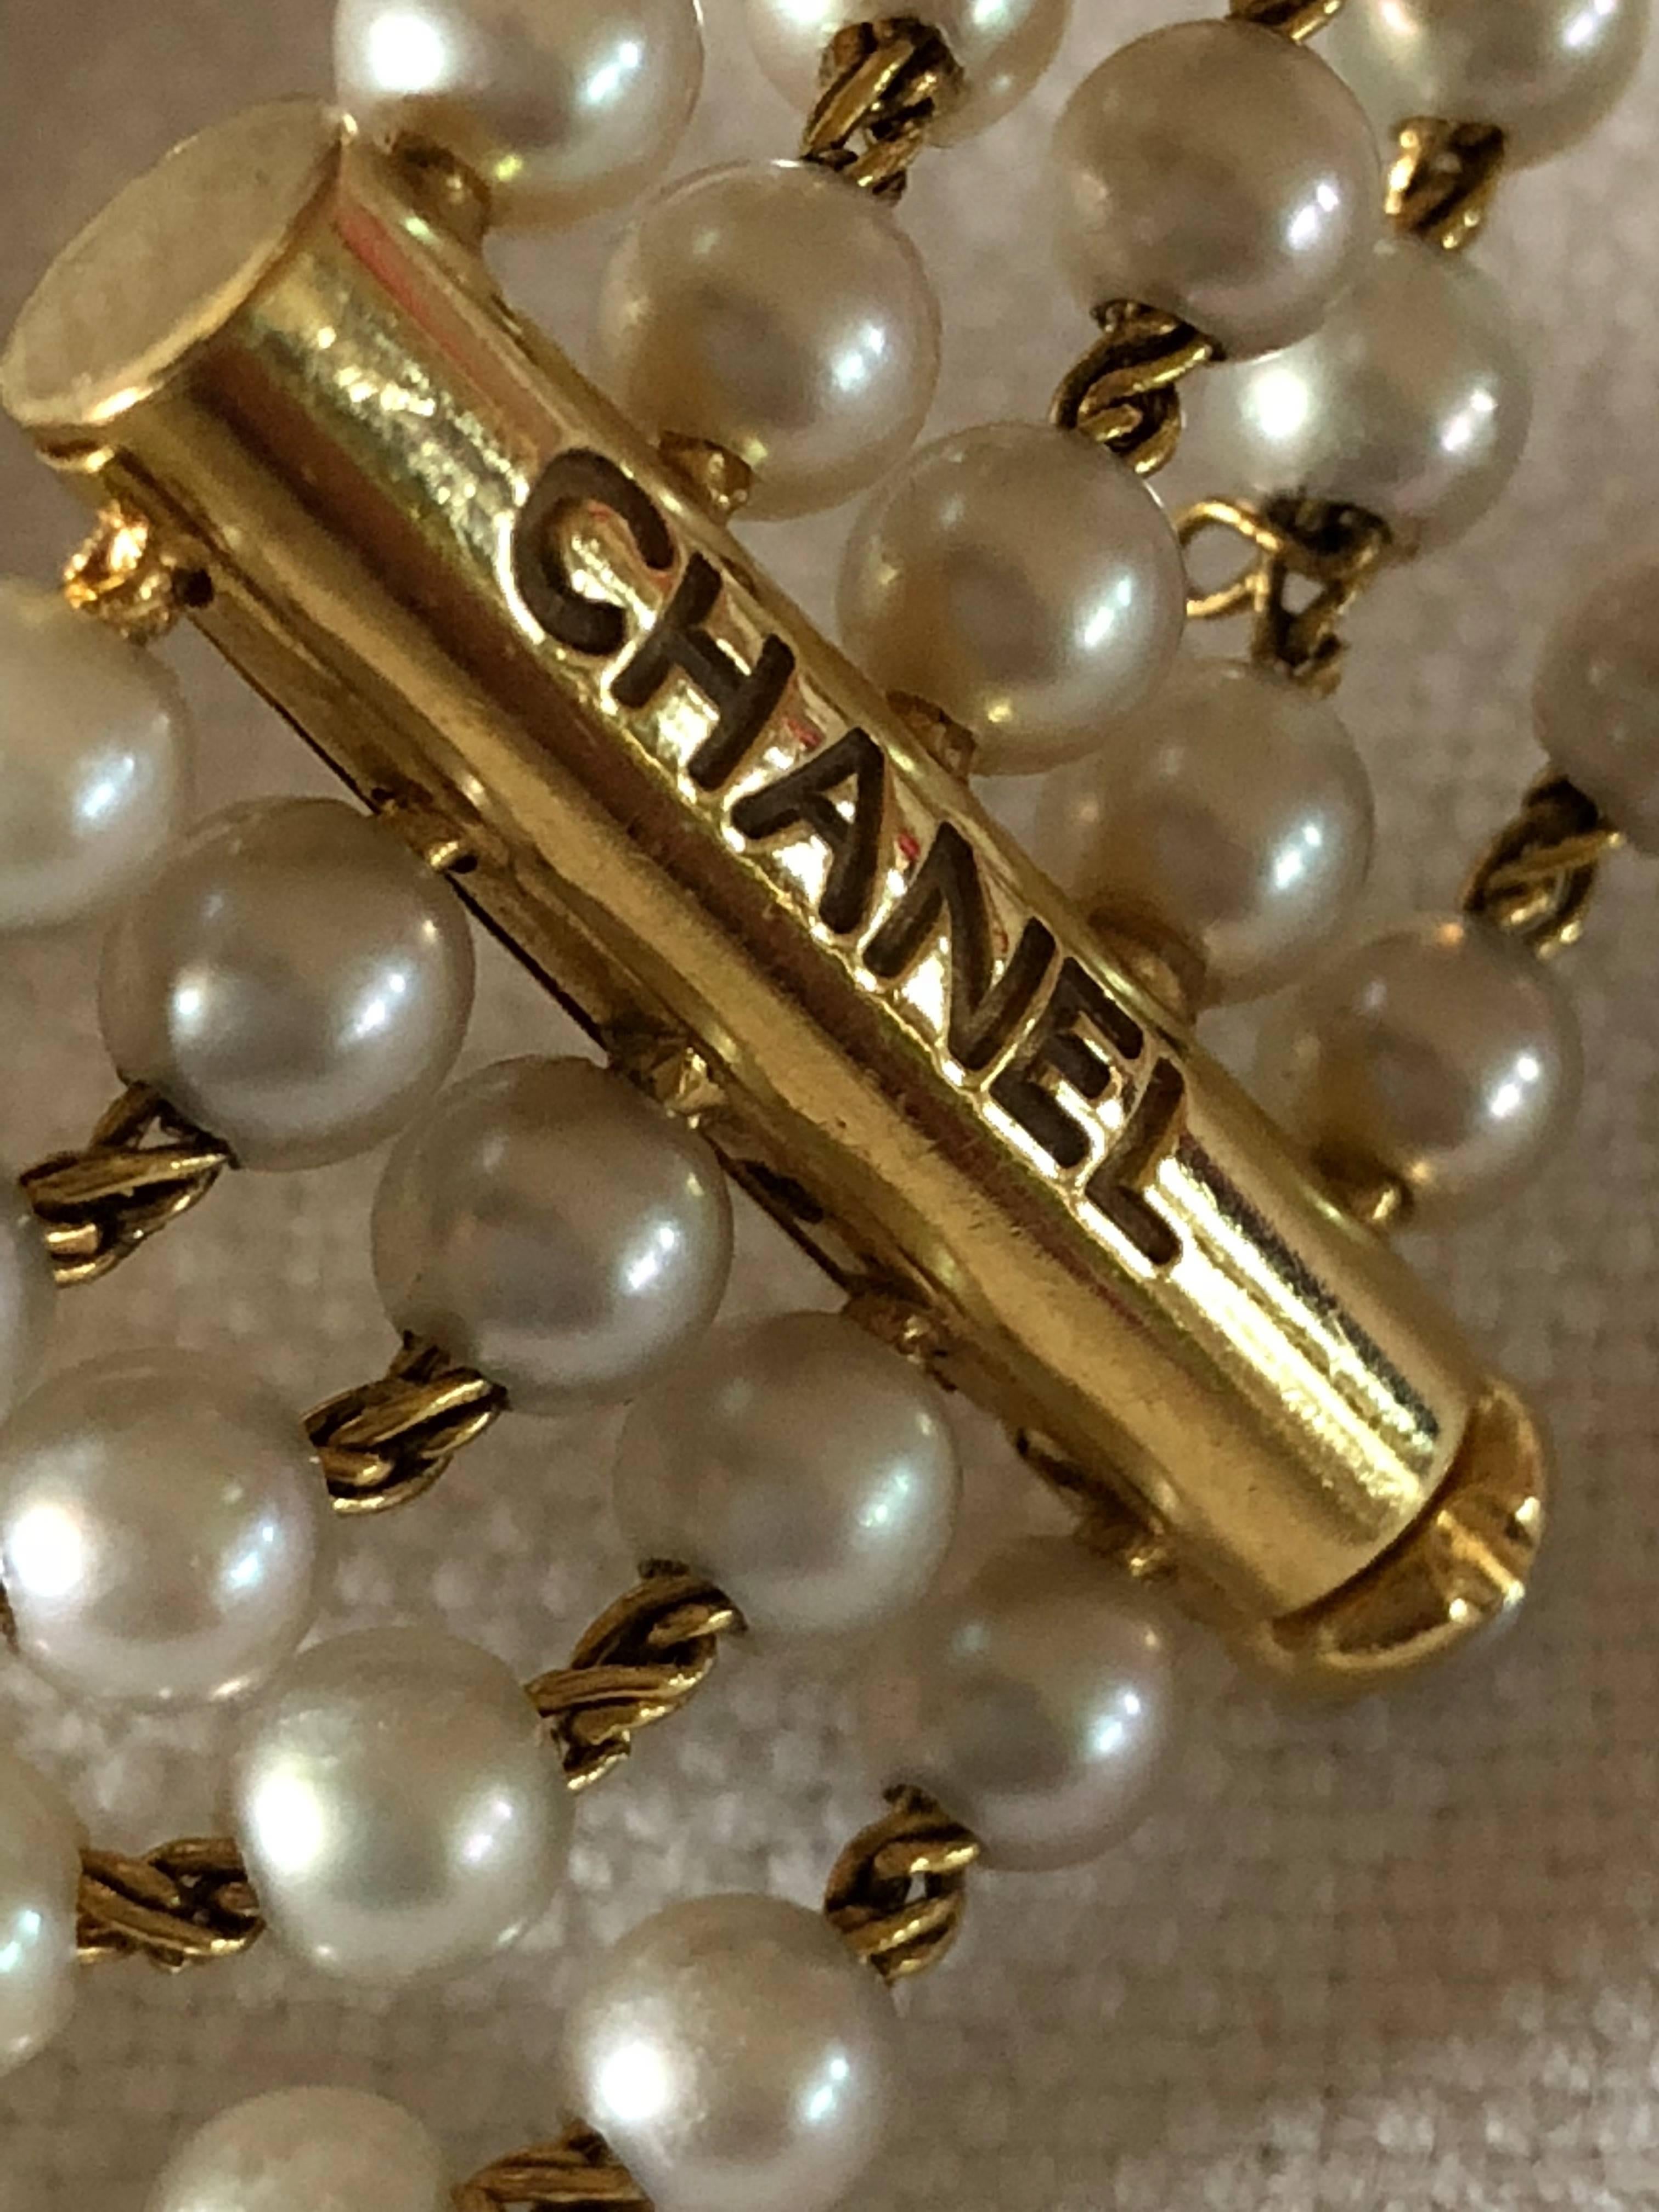 Pre-owned iconic Chanel watch

Ref: R.C. 30987
Movement: Quartz
Case: Yellow Gold 18K
Bracelet: Akoya Pearls - Wrist length of 17.5 cm
Weight: 44 gr approx.
Year: High Jewelry Collection 1989
Condition: Perfect
Comes with: Chanel pouch

All items